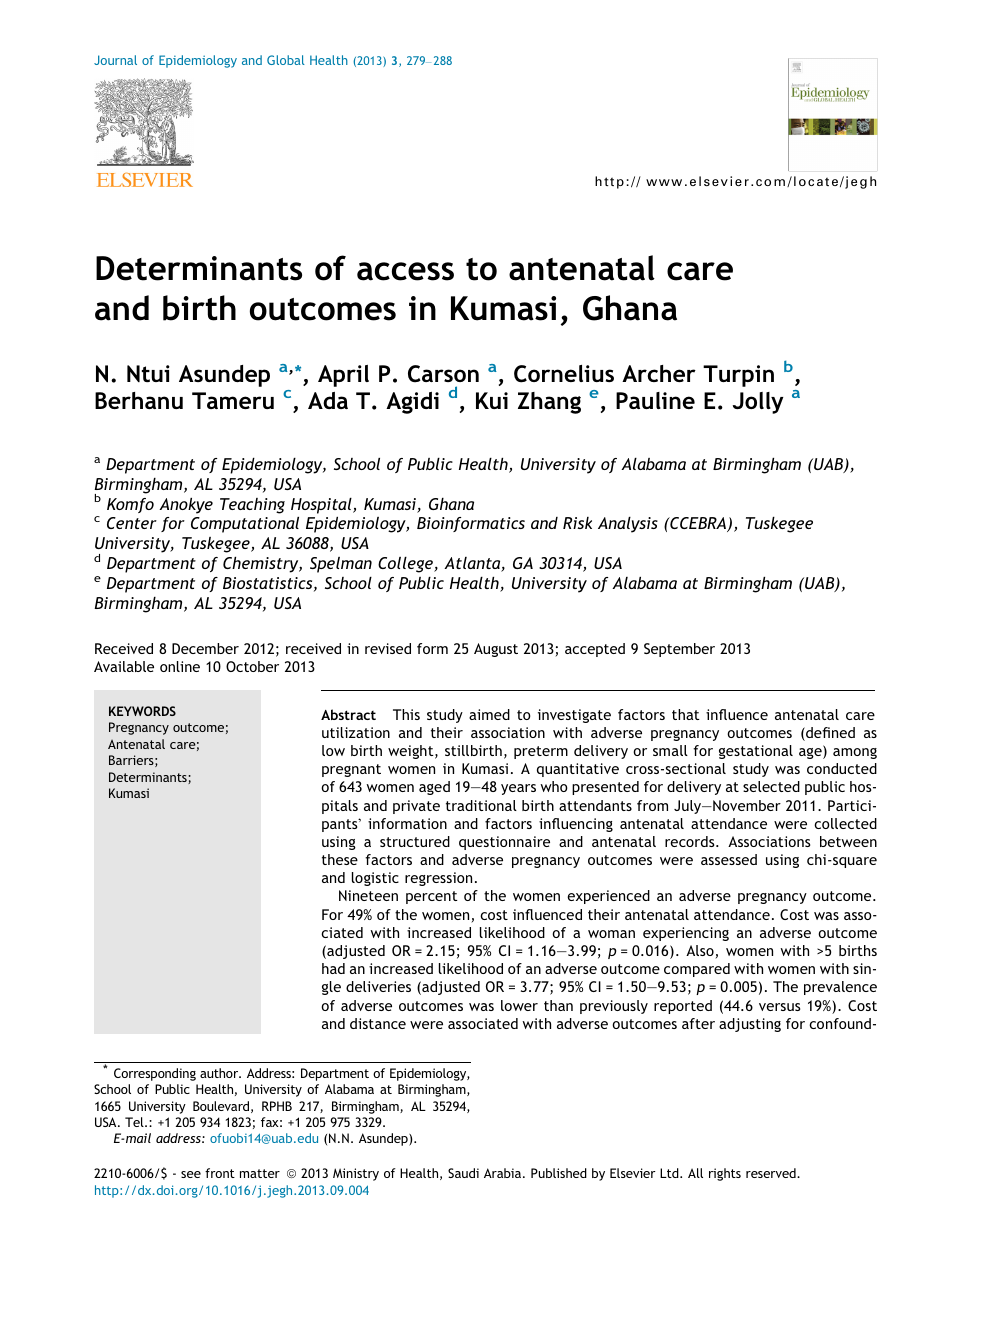 Spatial variation and inequities in antenatal care coverage in